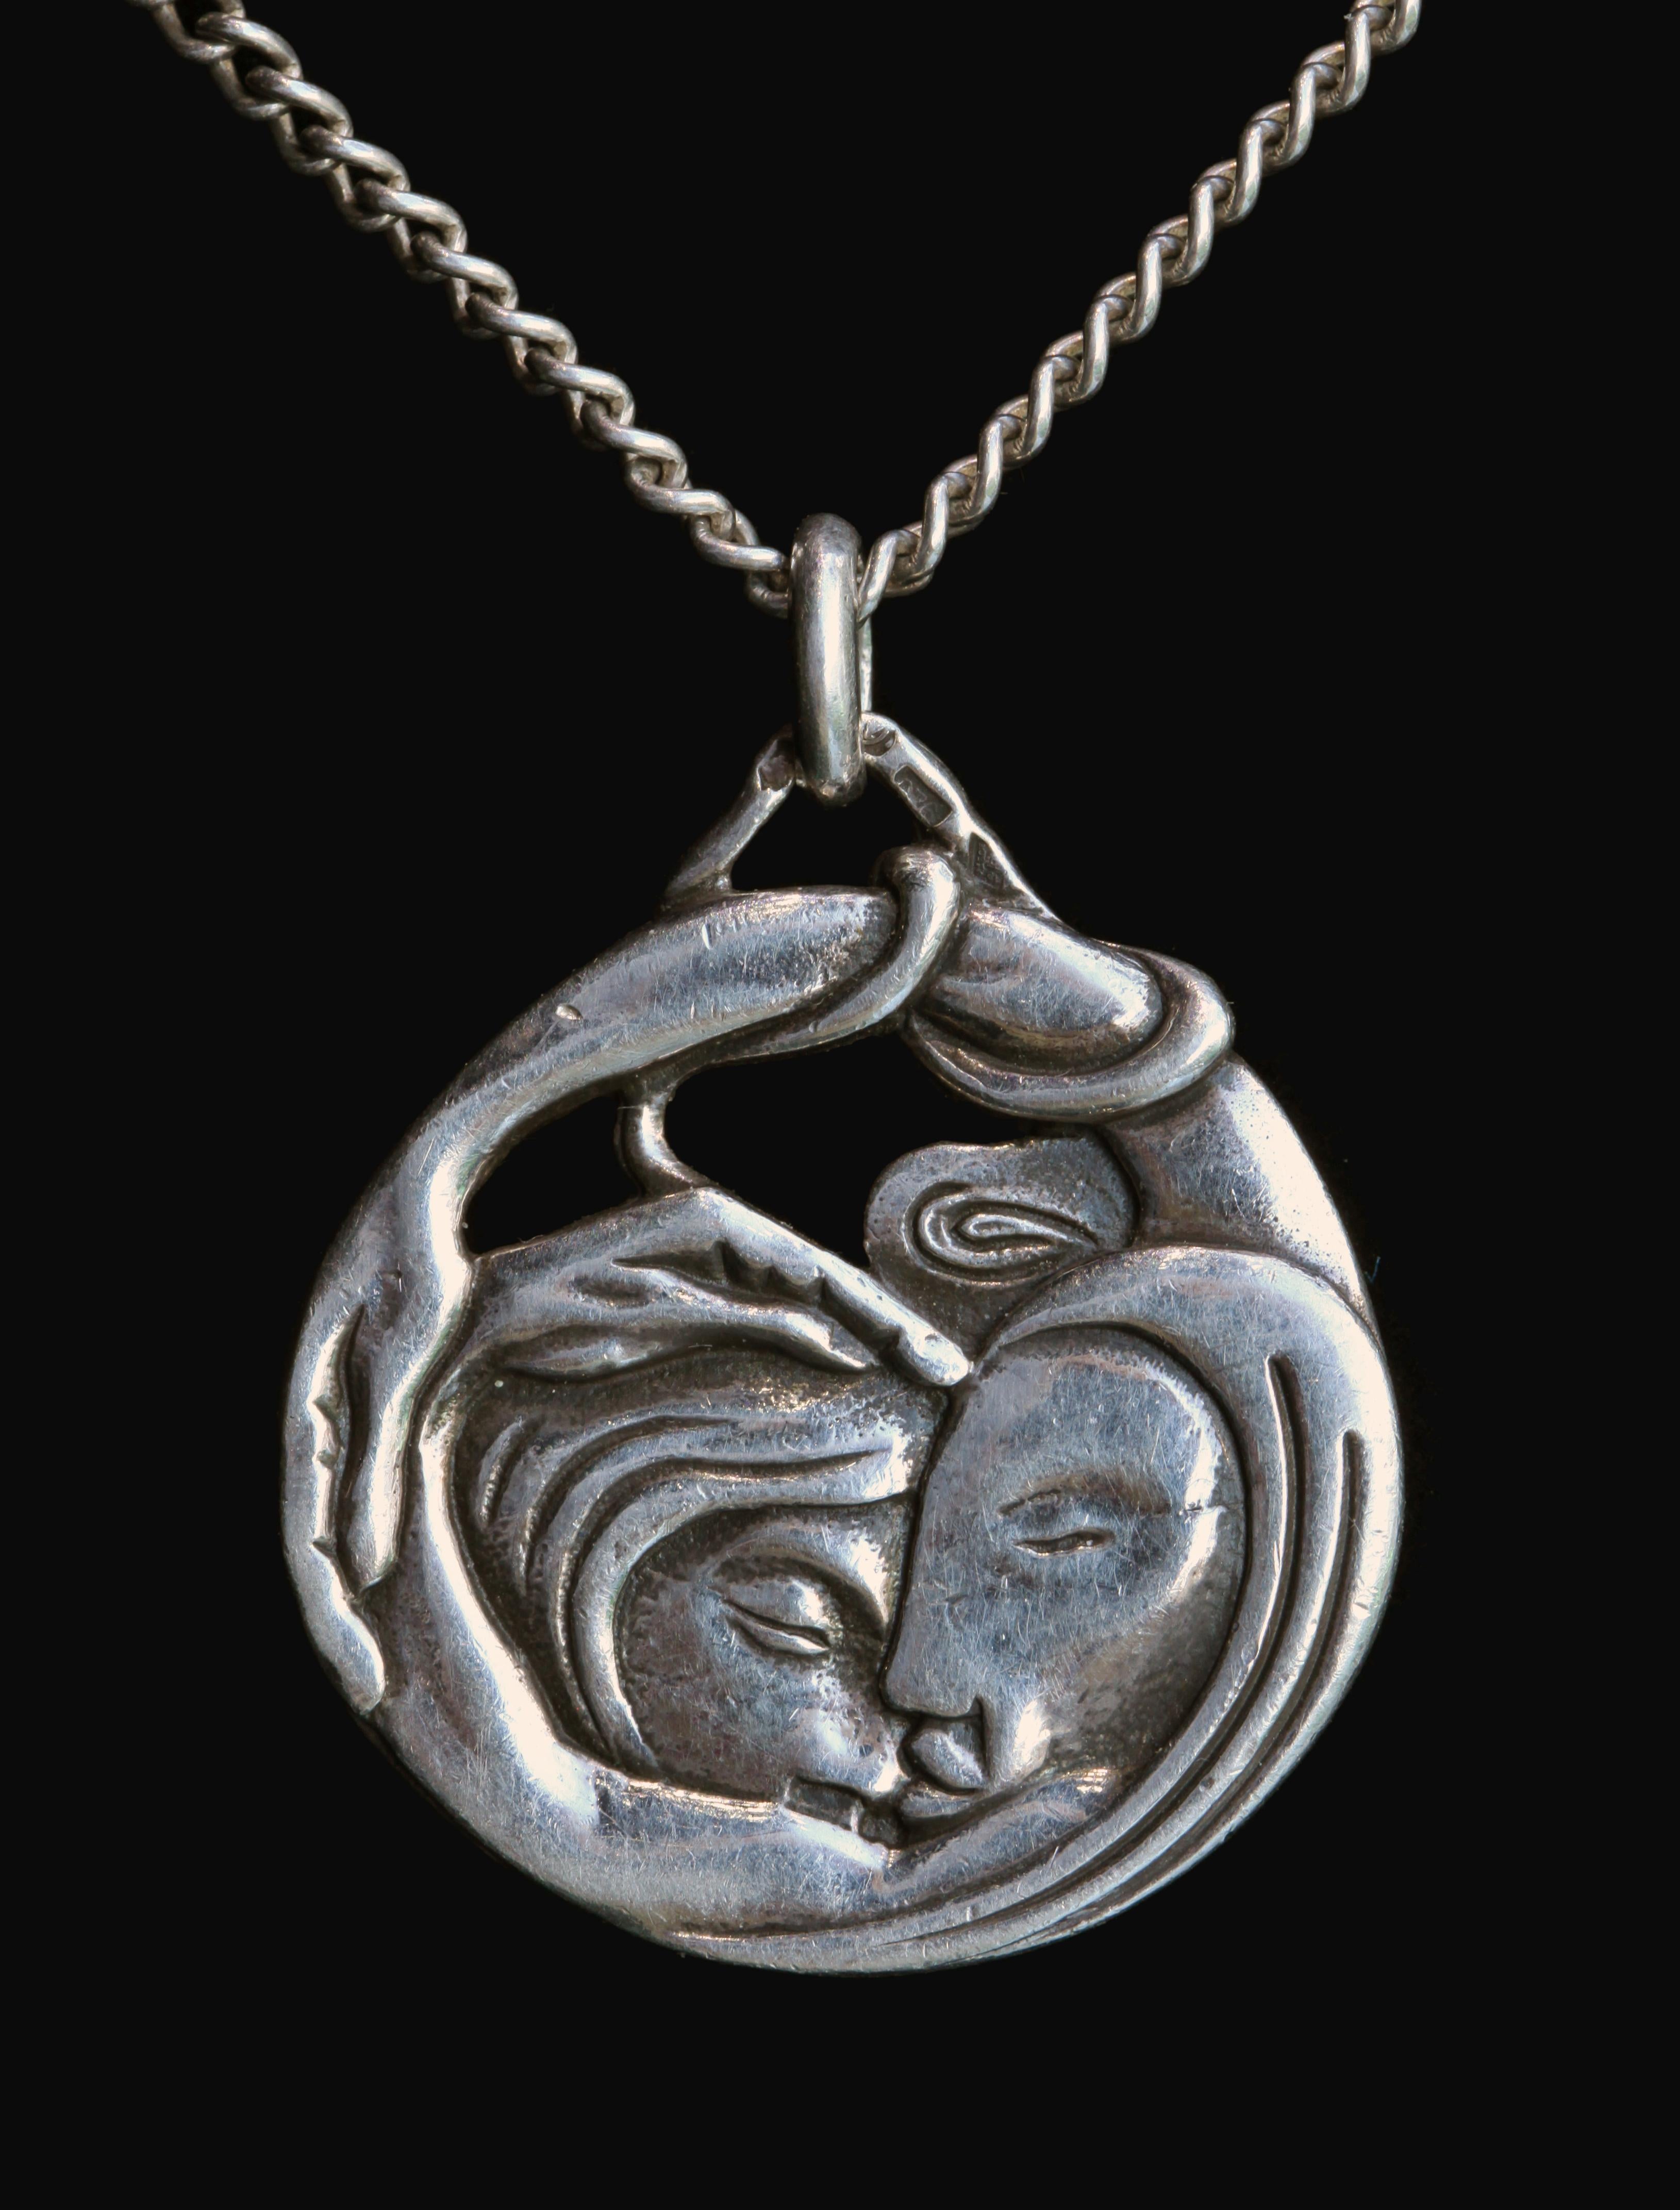 Masterful portrayal of Leda & The Swan by the sculptor Paco Durrio. This symbolist pendant shows the God Zeus having transformed himself into a swan in order to seduce the beautiful Queen Leda. The reverse shows a rarely depicted portrayal of Zeus &